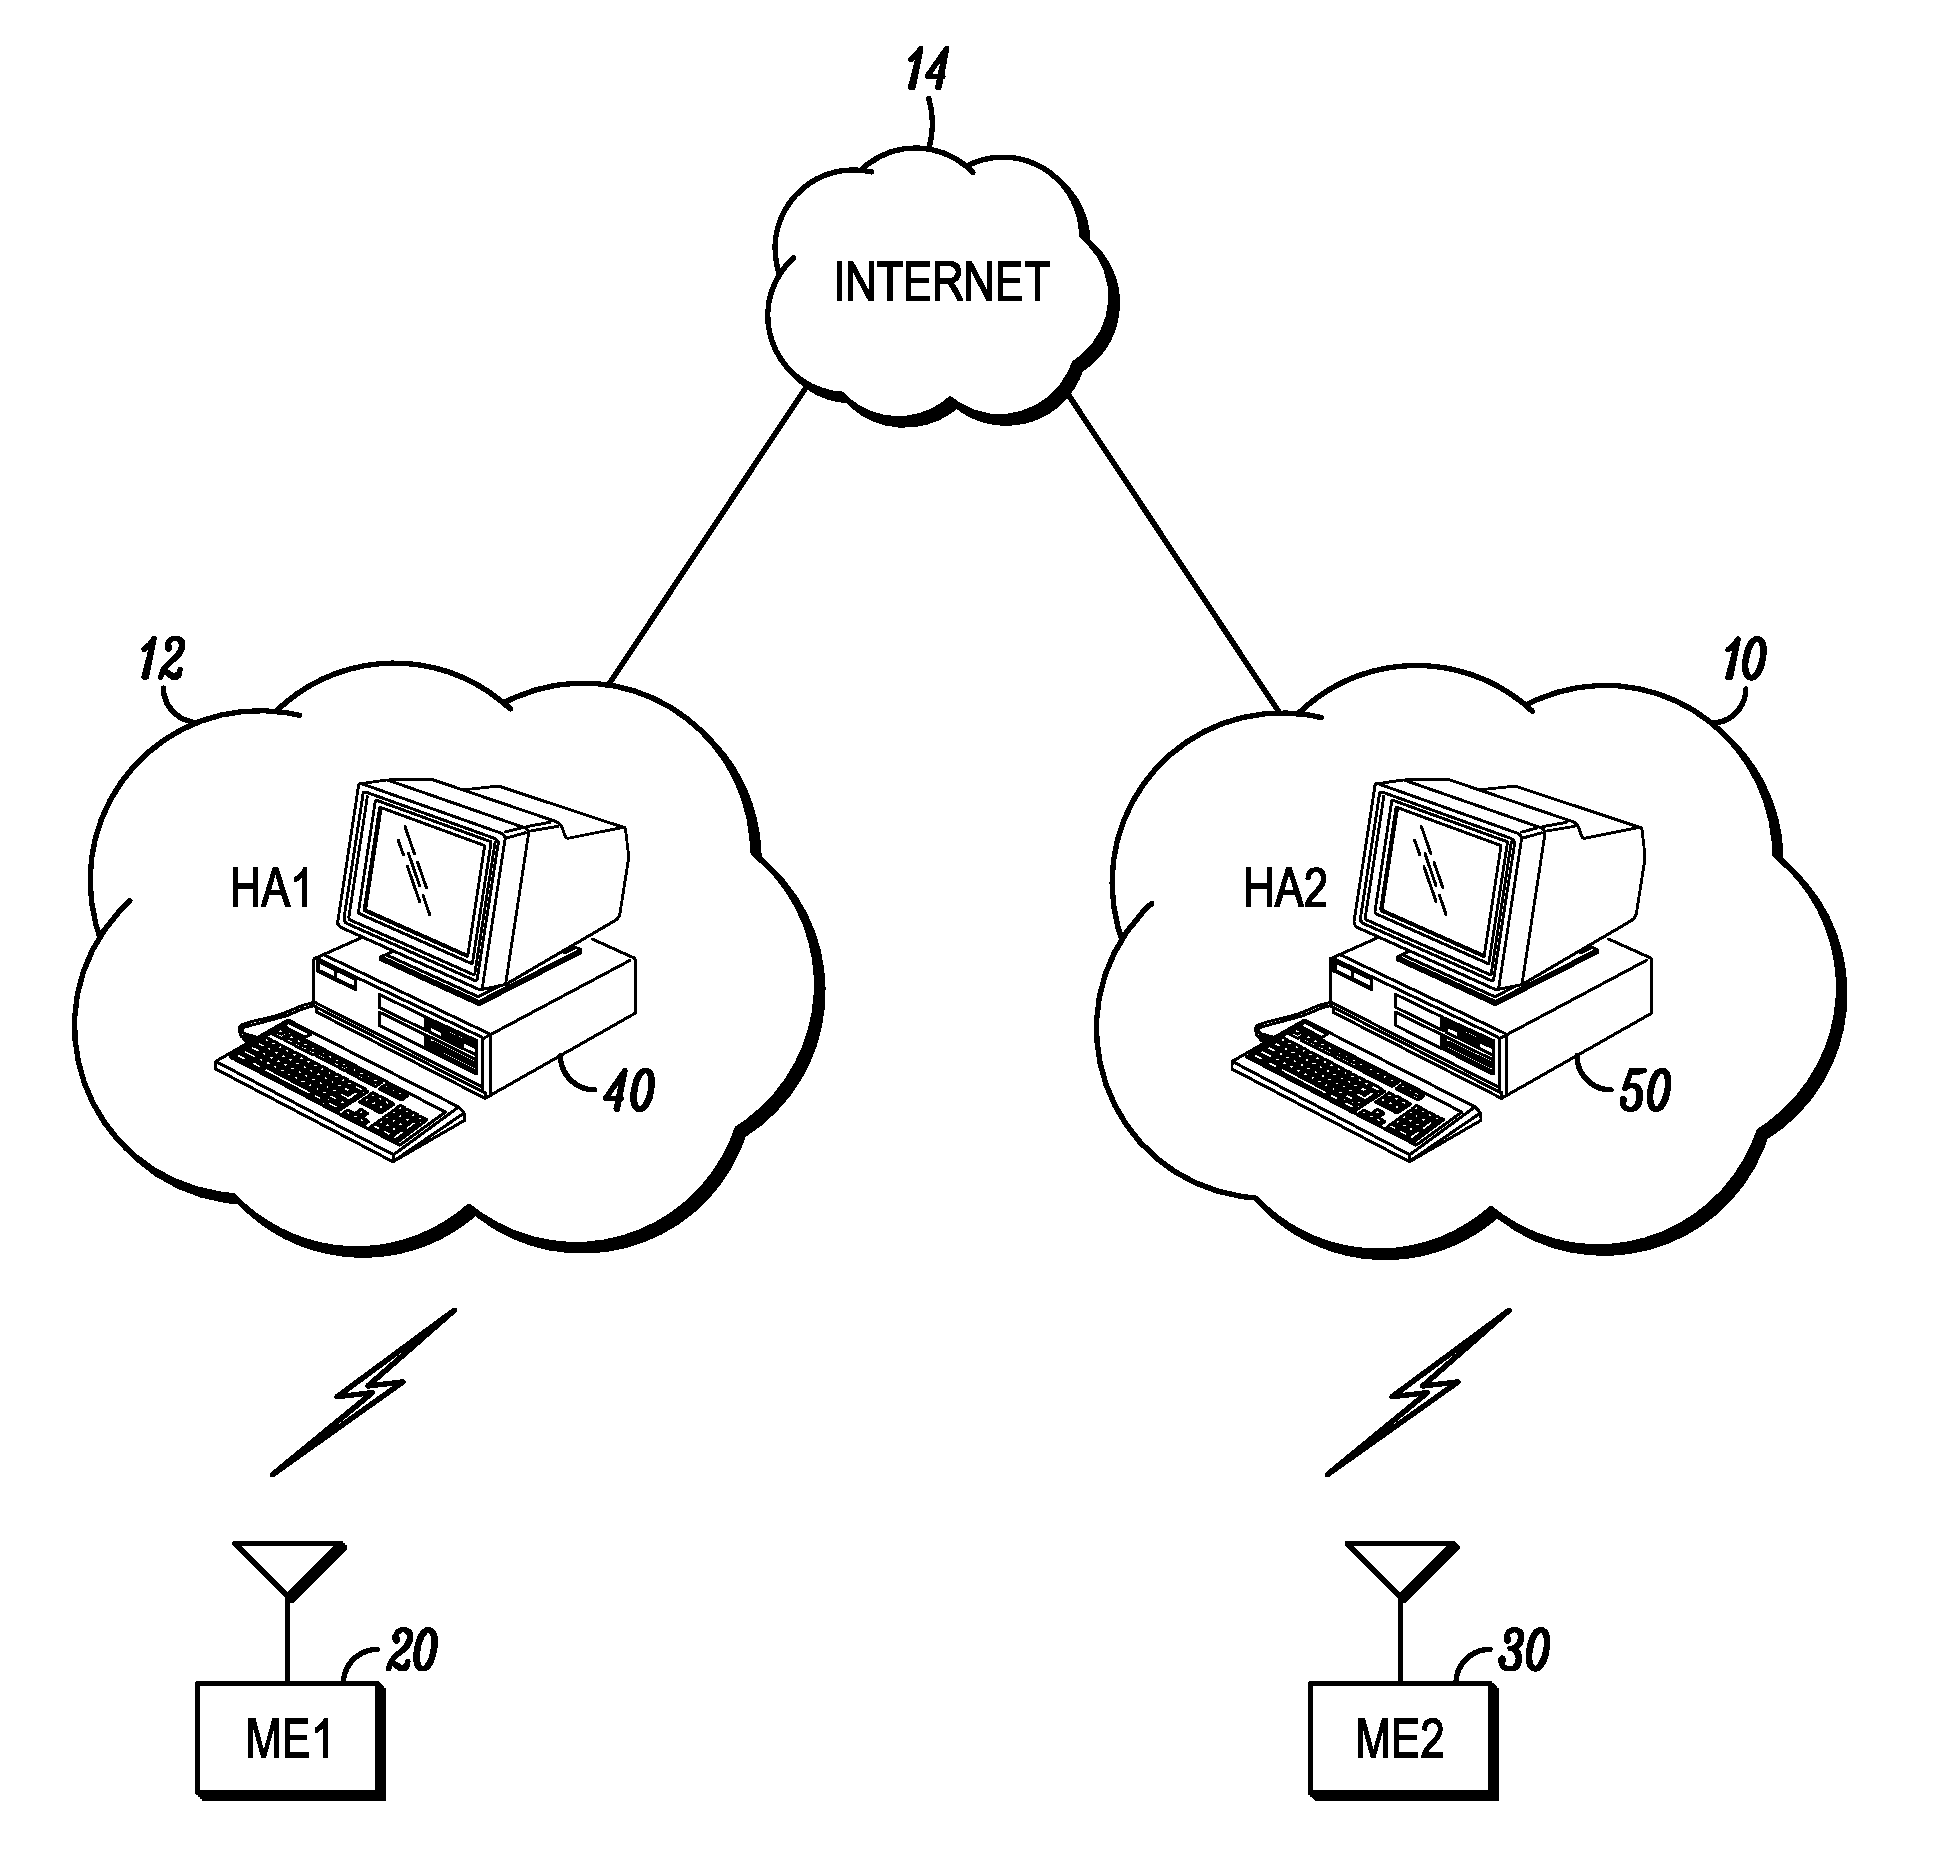 Method for route optimization between mobile entities